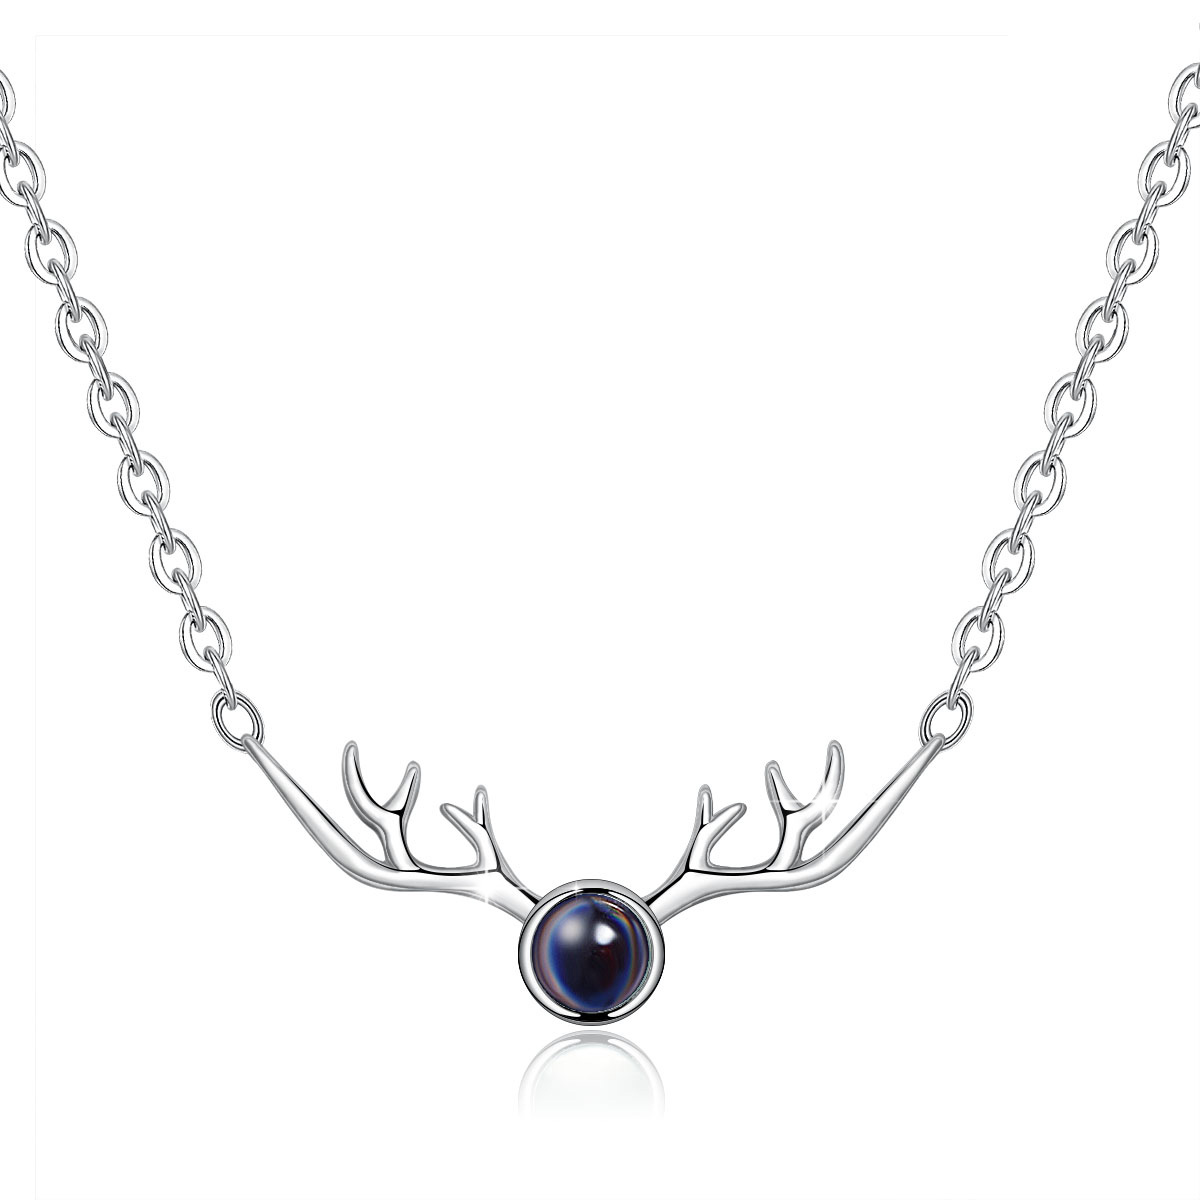 S925 Sterling Silver Platinum Plating Classic Little Antlers Shape 100 Languages I Love You Projection Pendant Necklaces